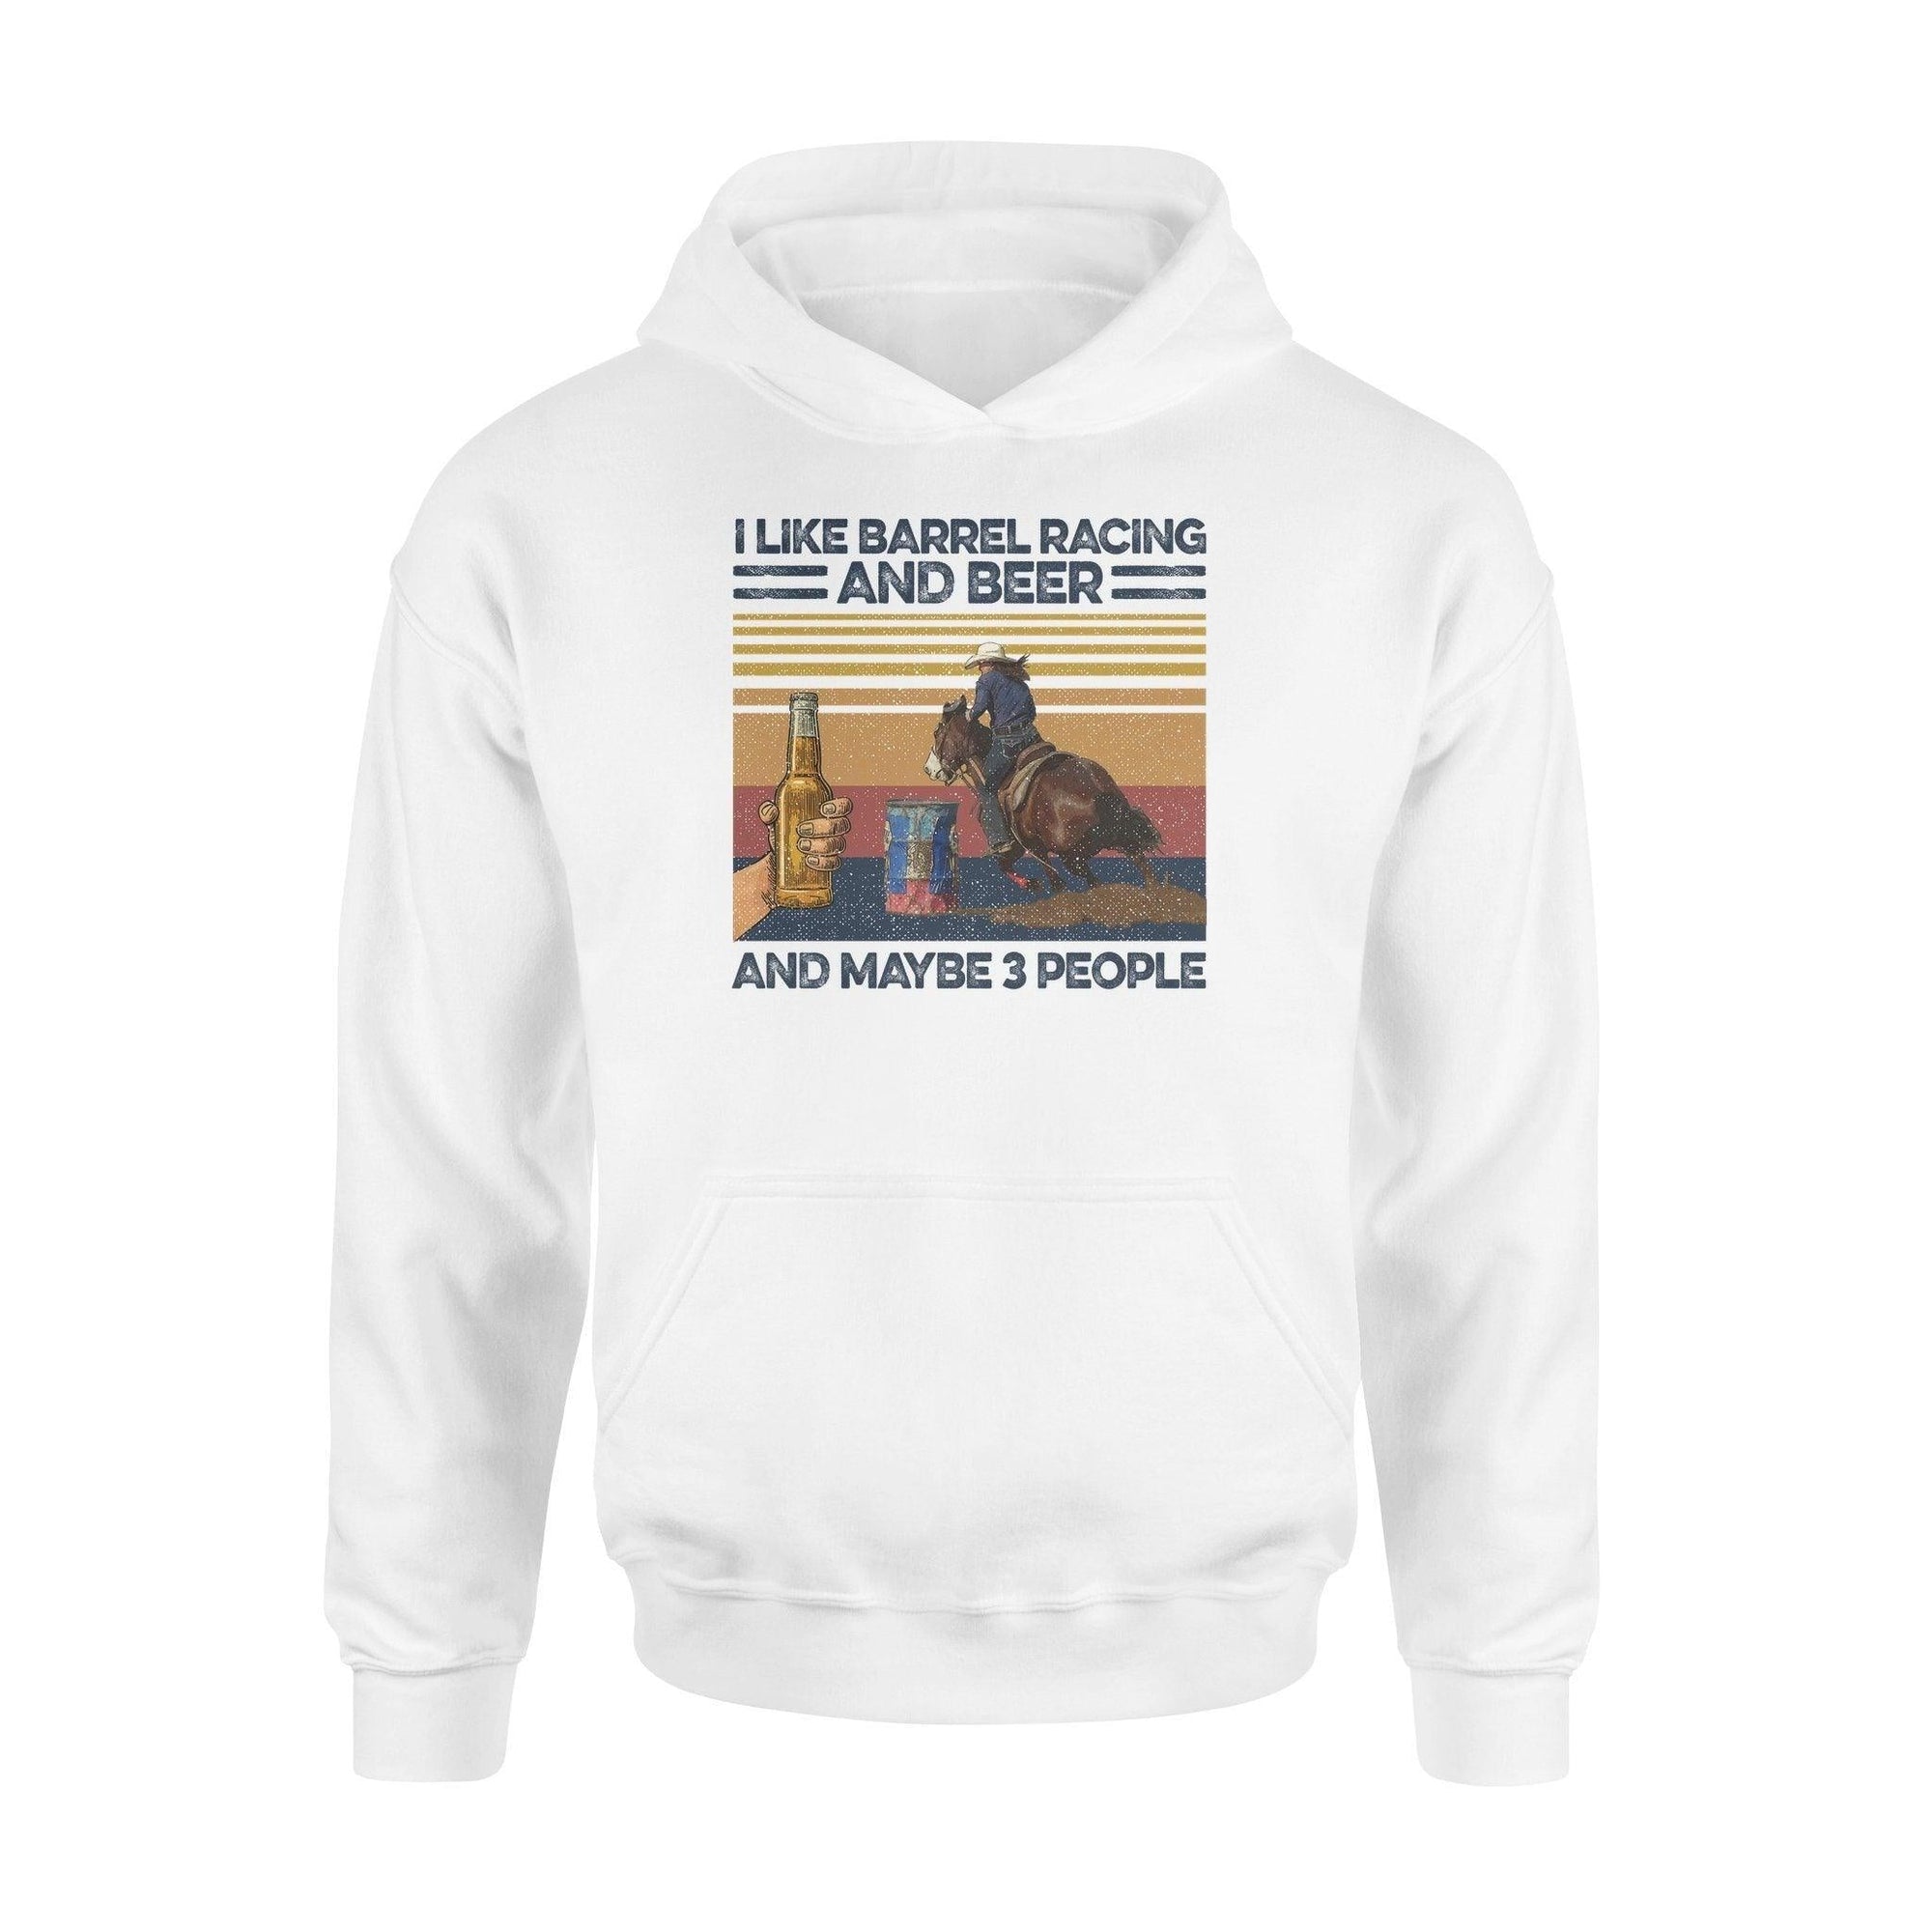 Horse Barrel Racing All I Care About Is Barrel Racing - Standard Hoodie - PERSONAL84